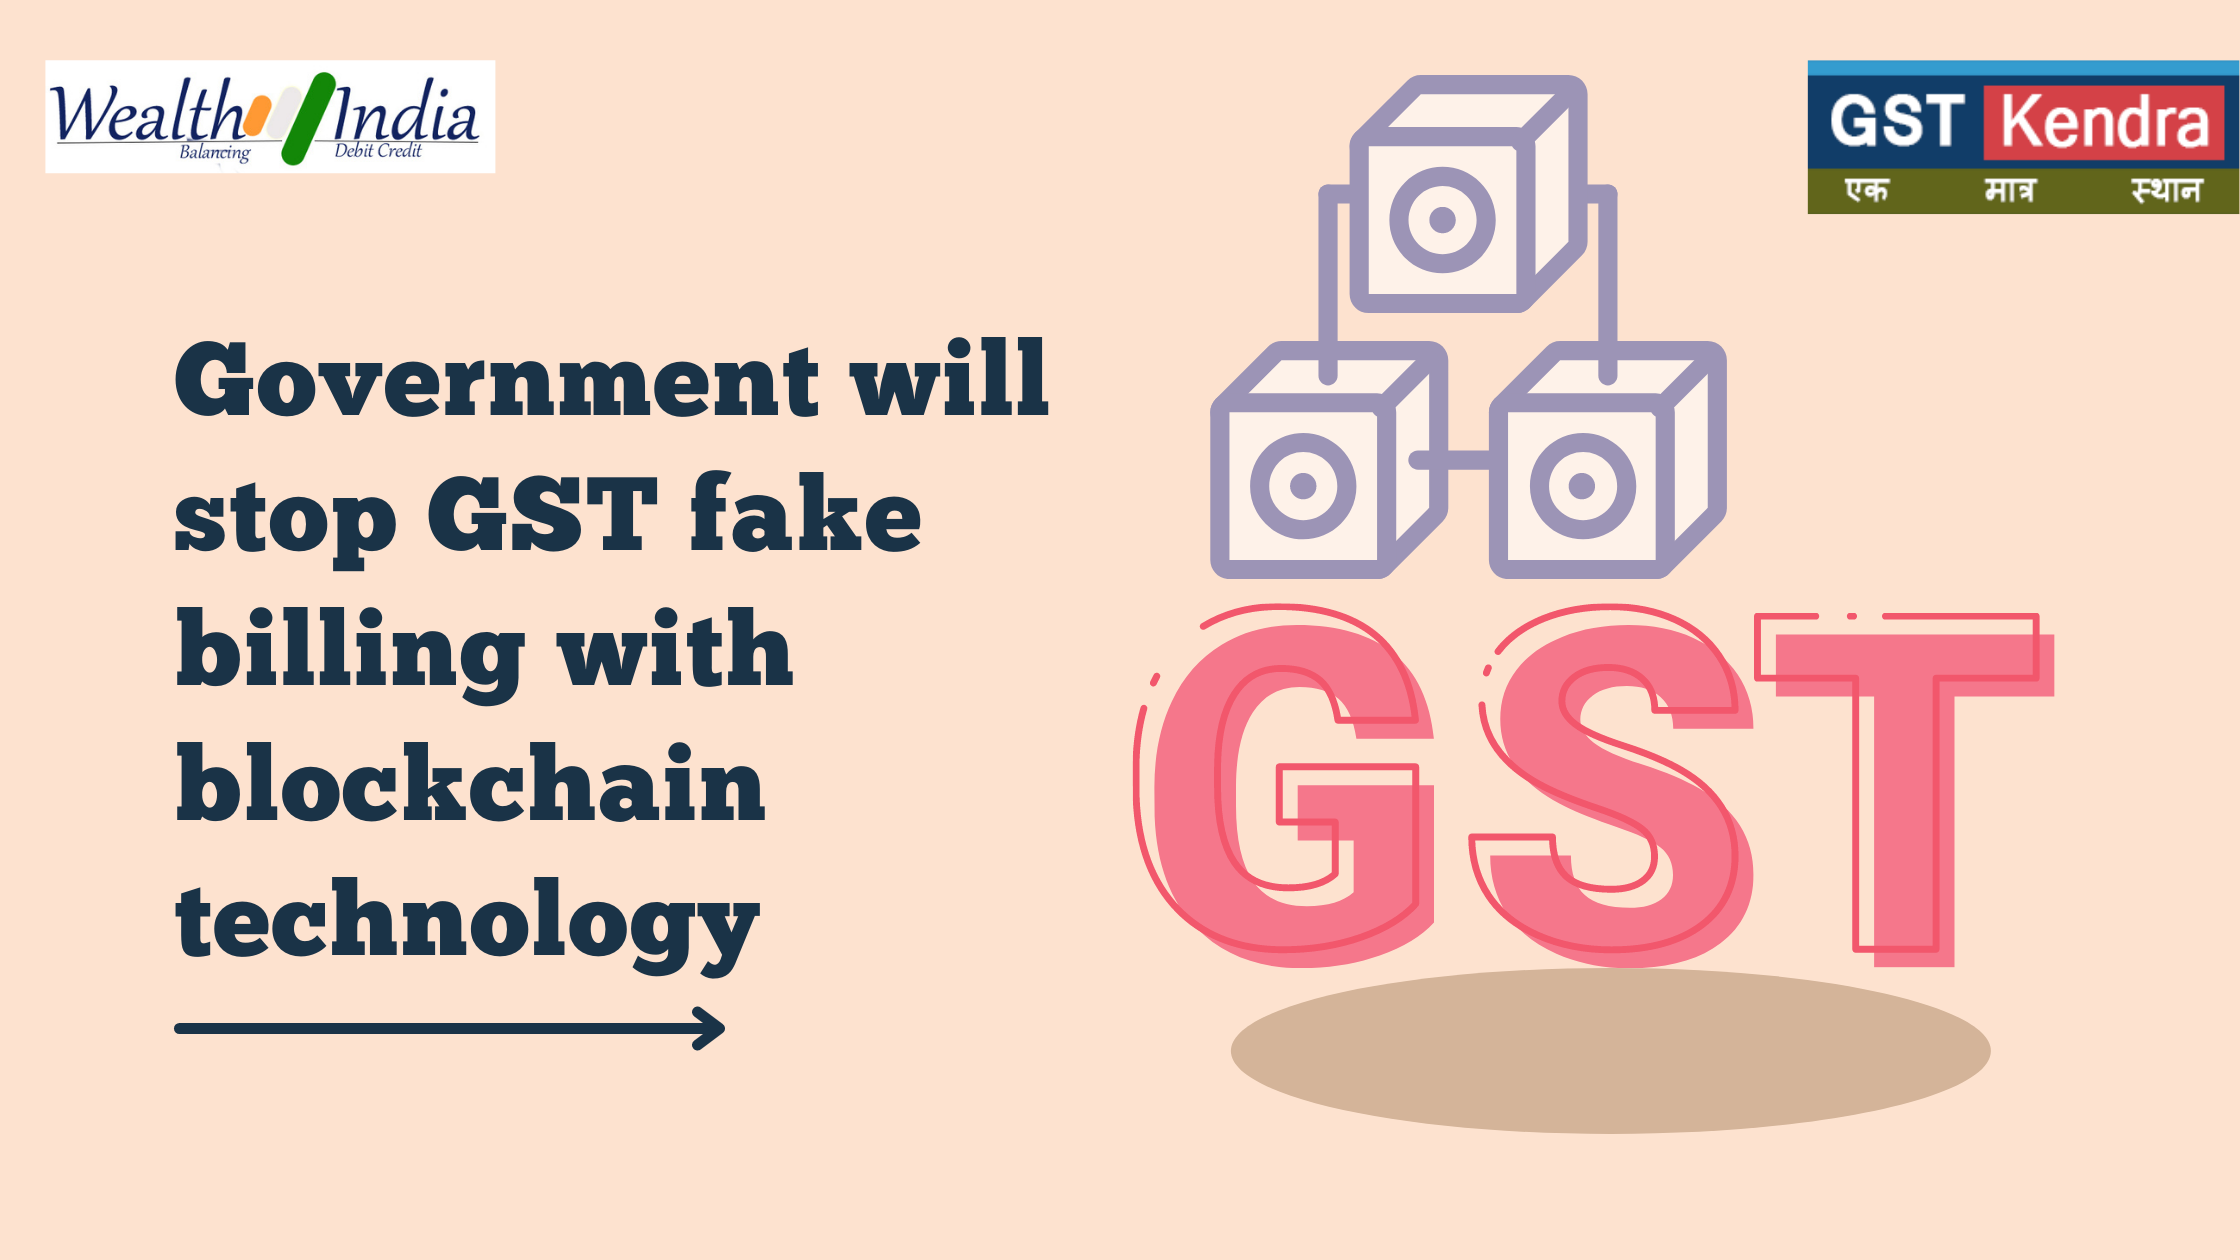 Govt will stop gst fake billing with blockchain technology